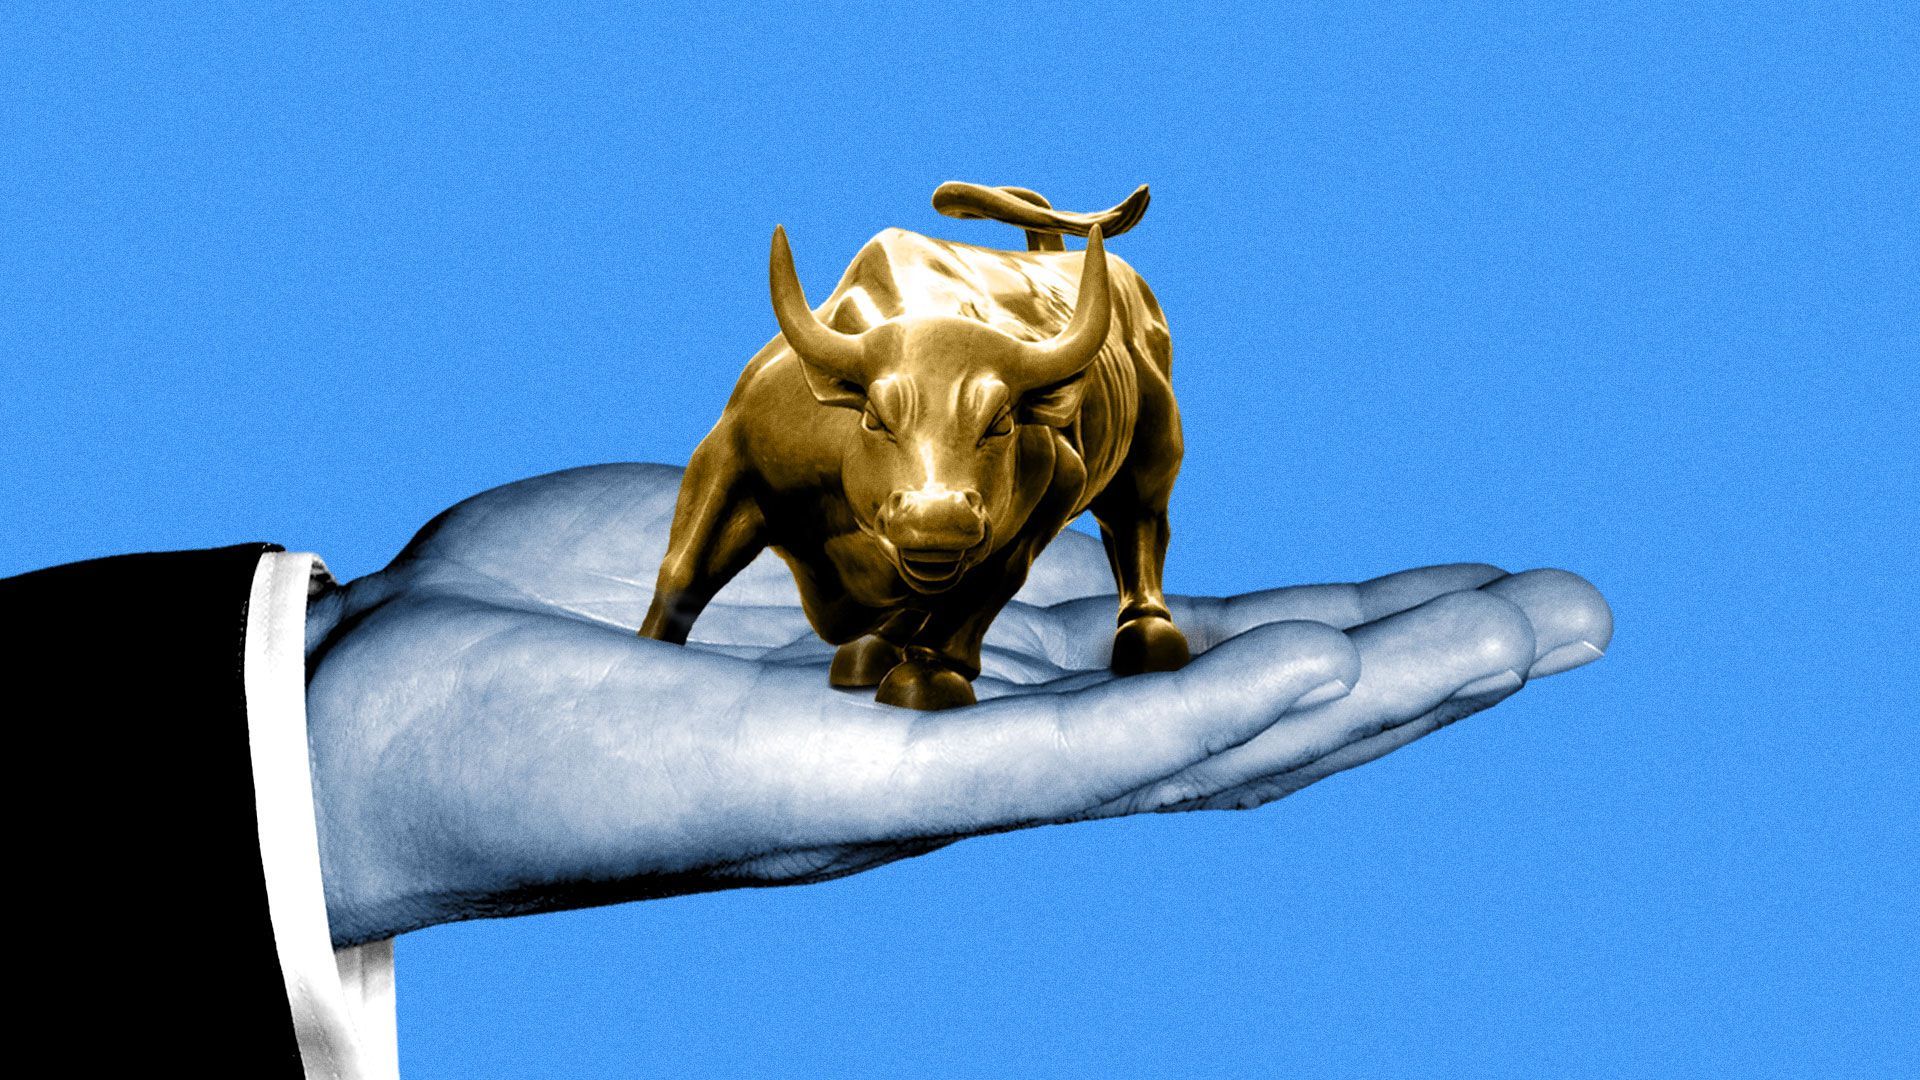 Illustration of suited hand holding the Wall Street bull